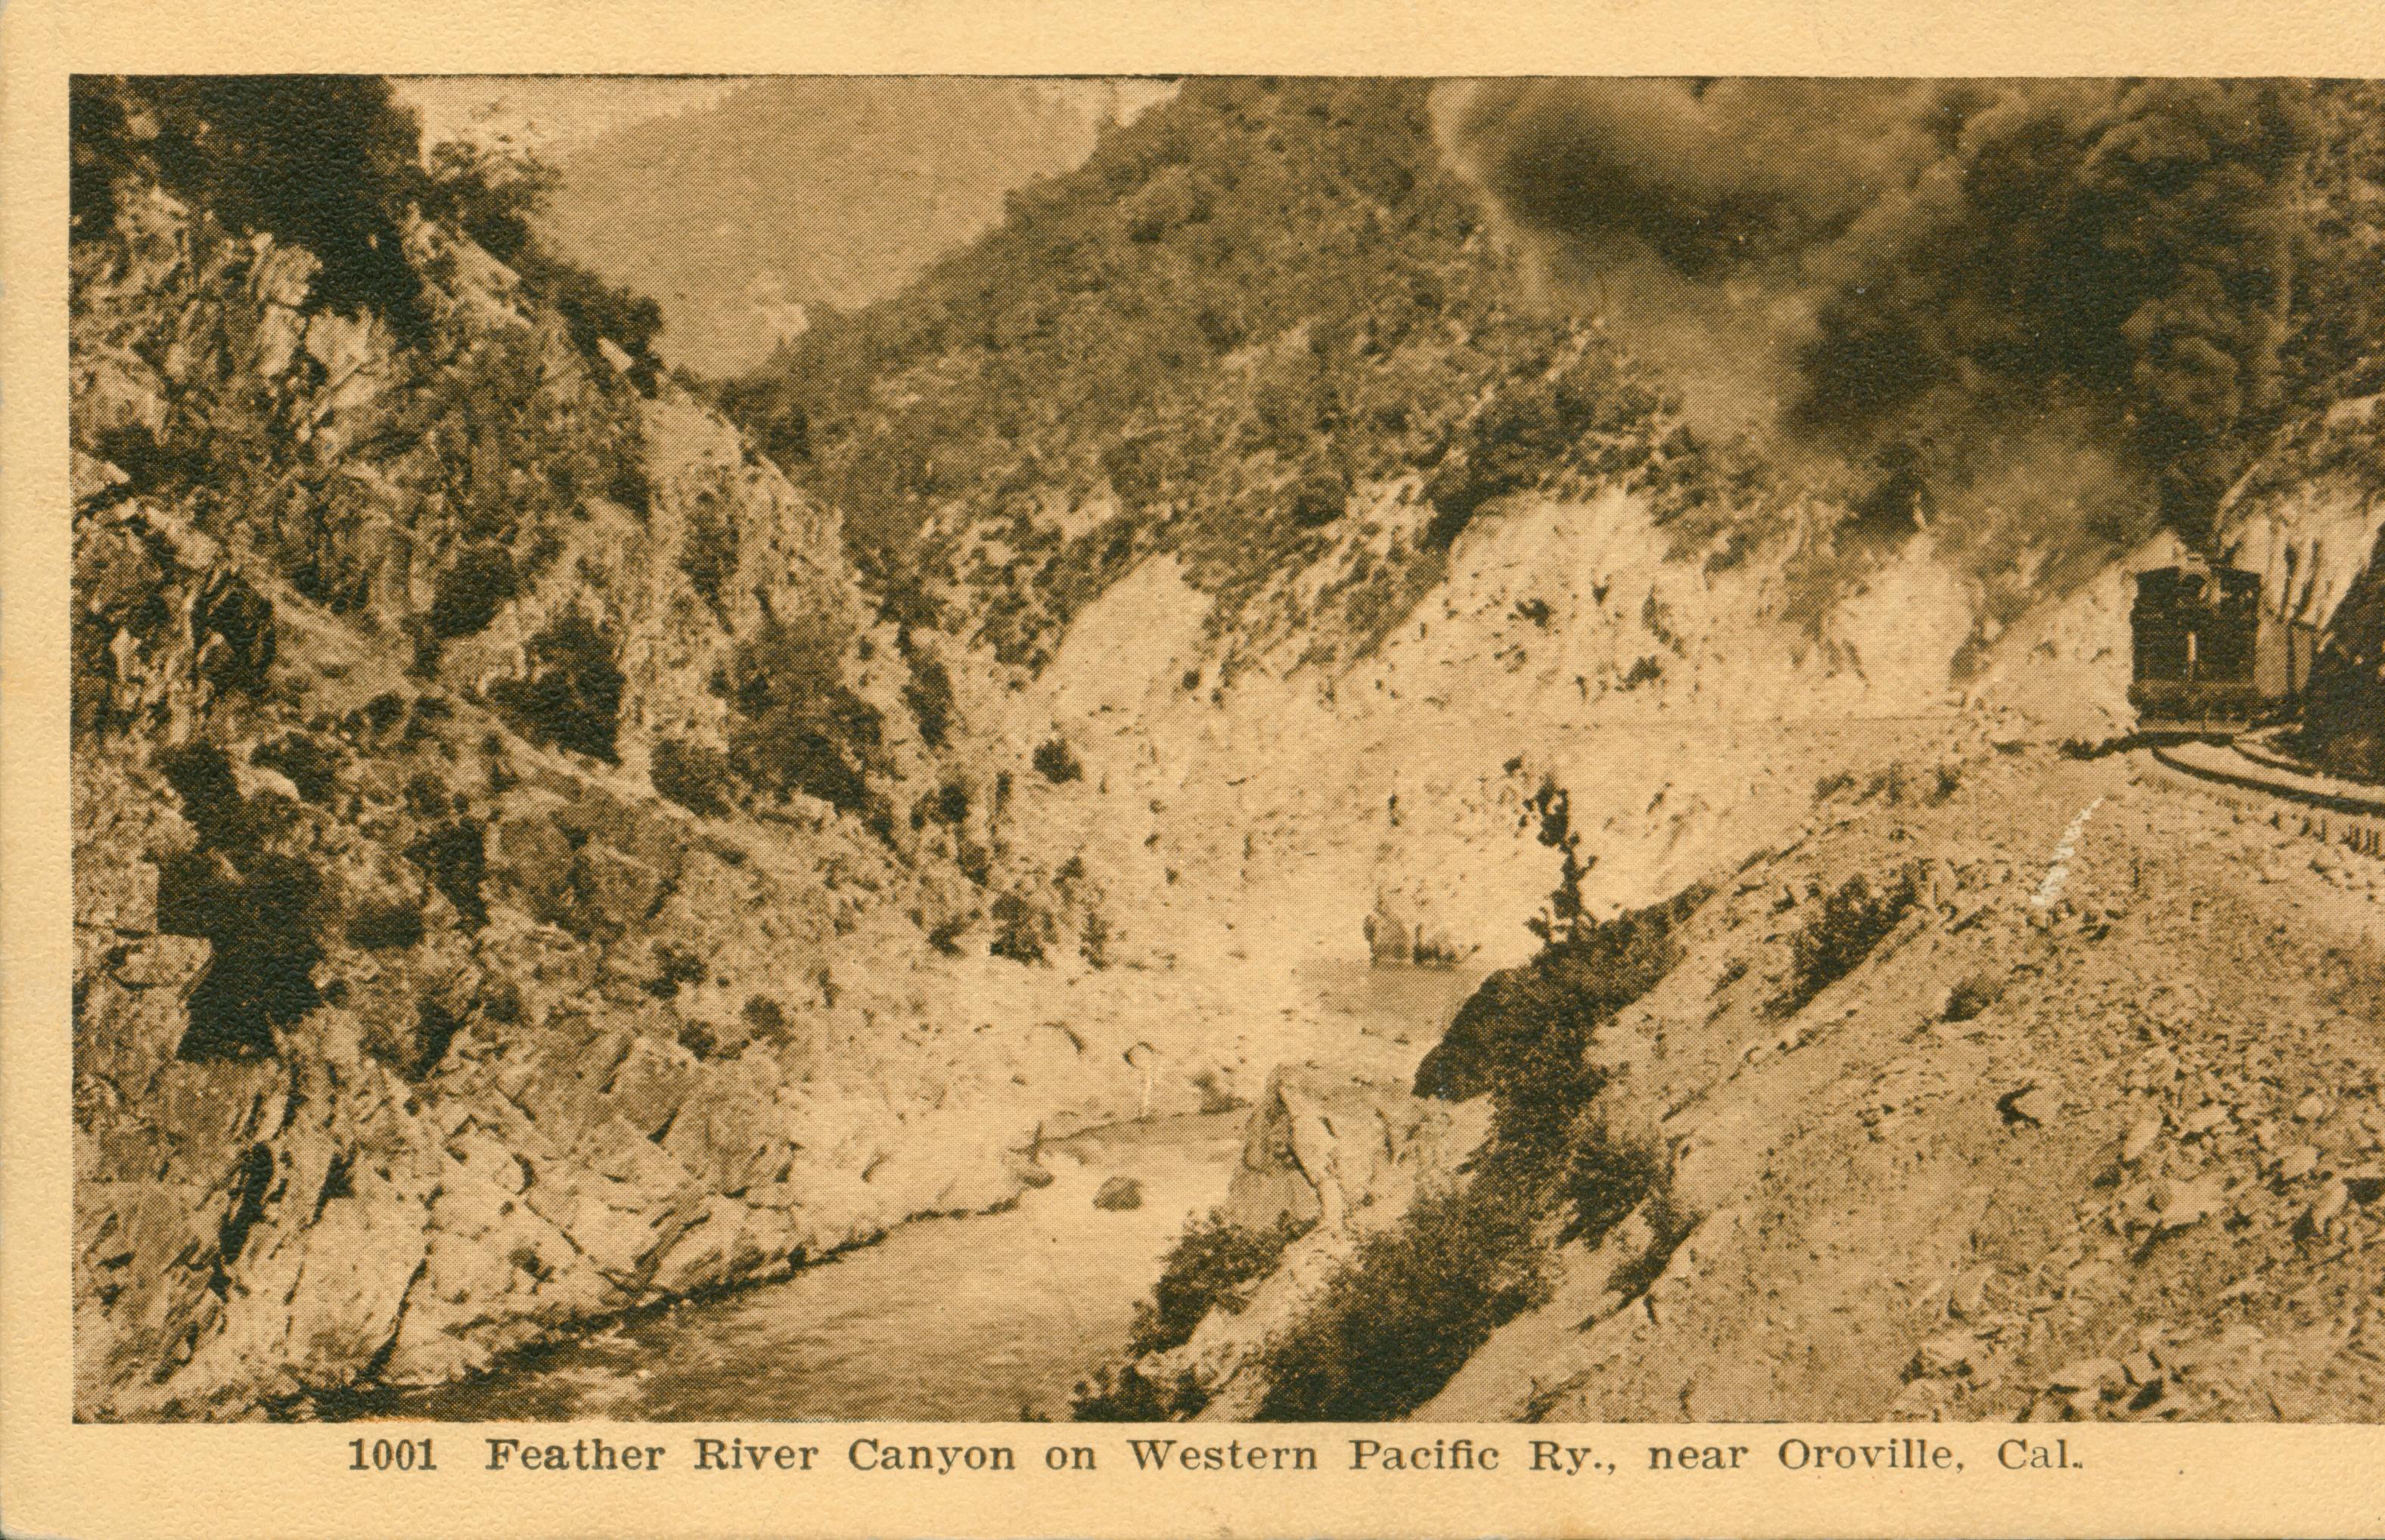 Shows a train steaming along the edge of the Feather River Canyon